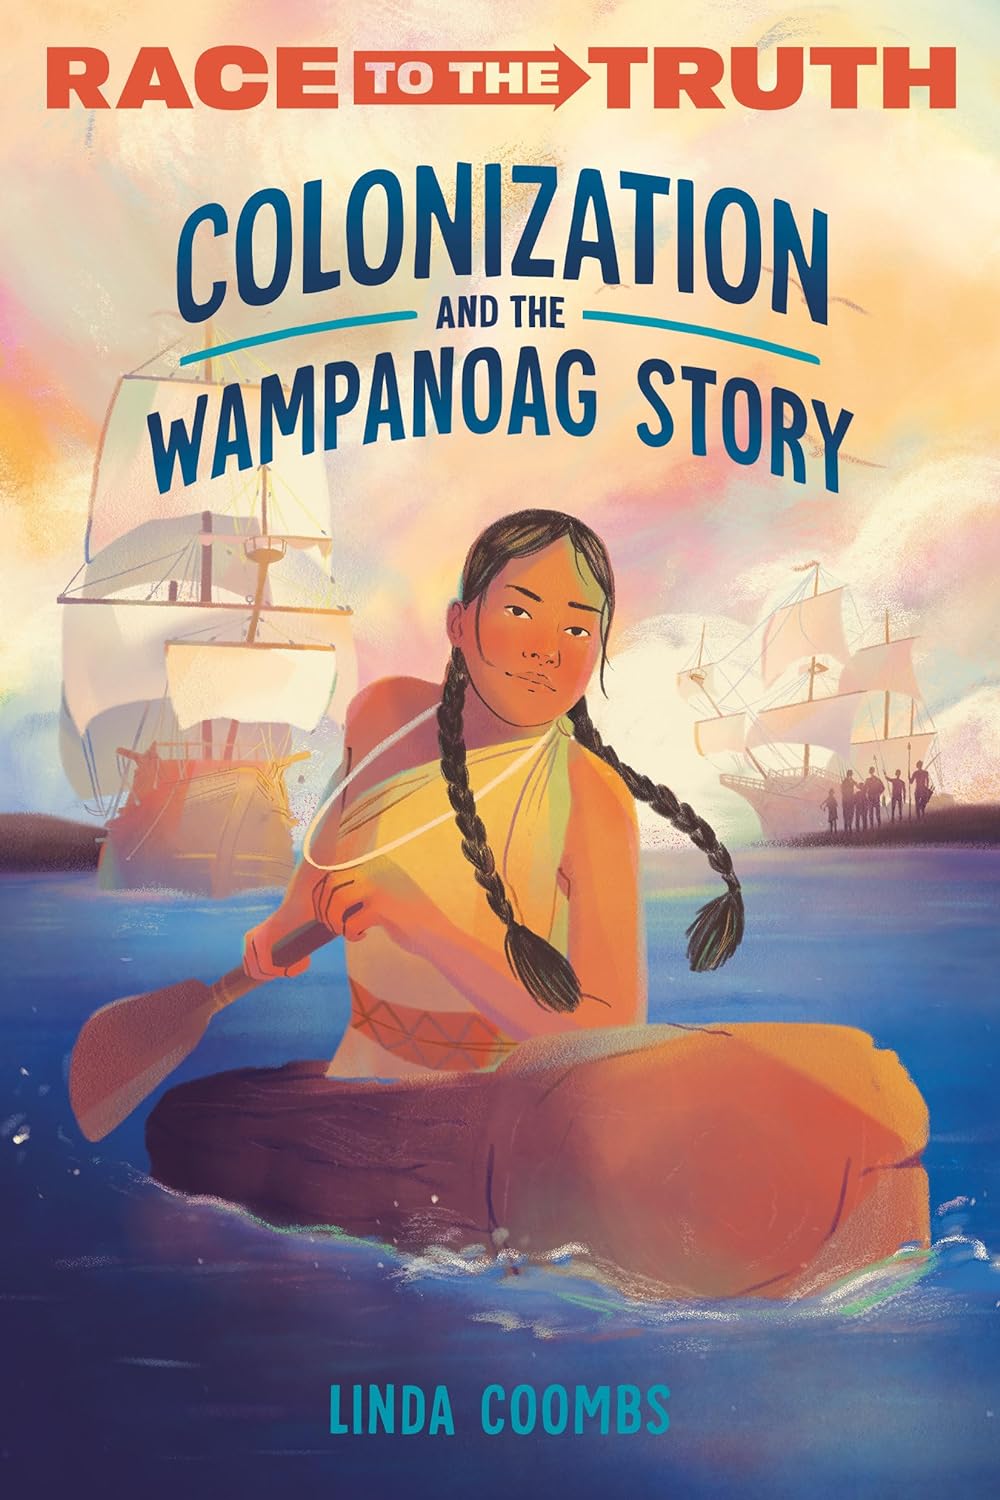 Colonization and the Wampanoag Story by Linda Coombs